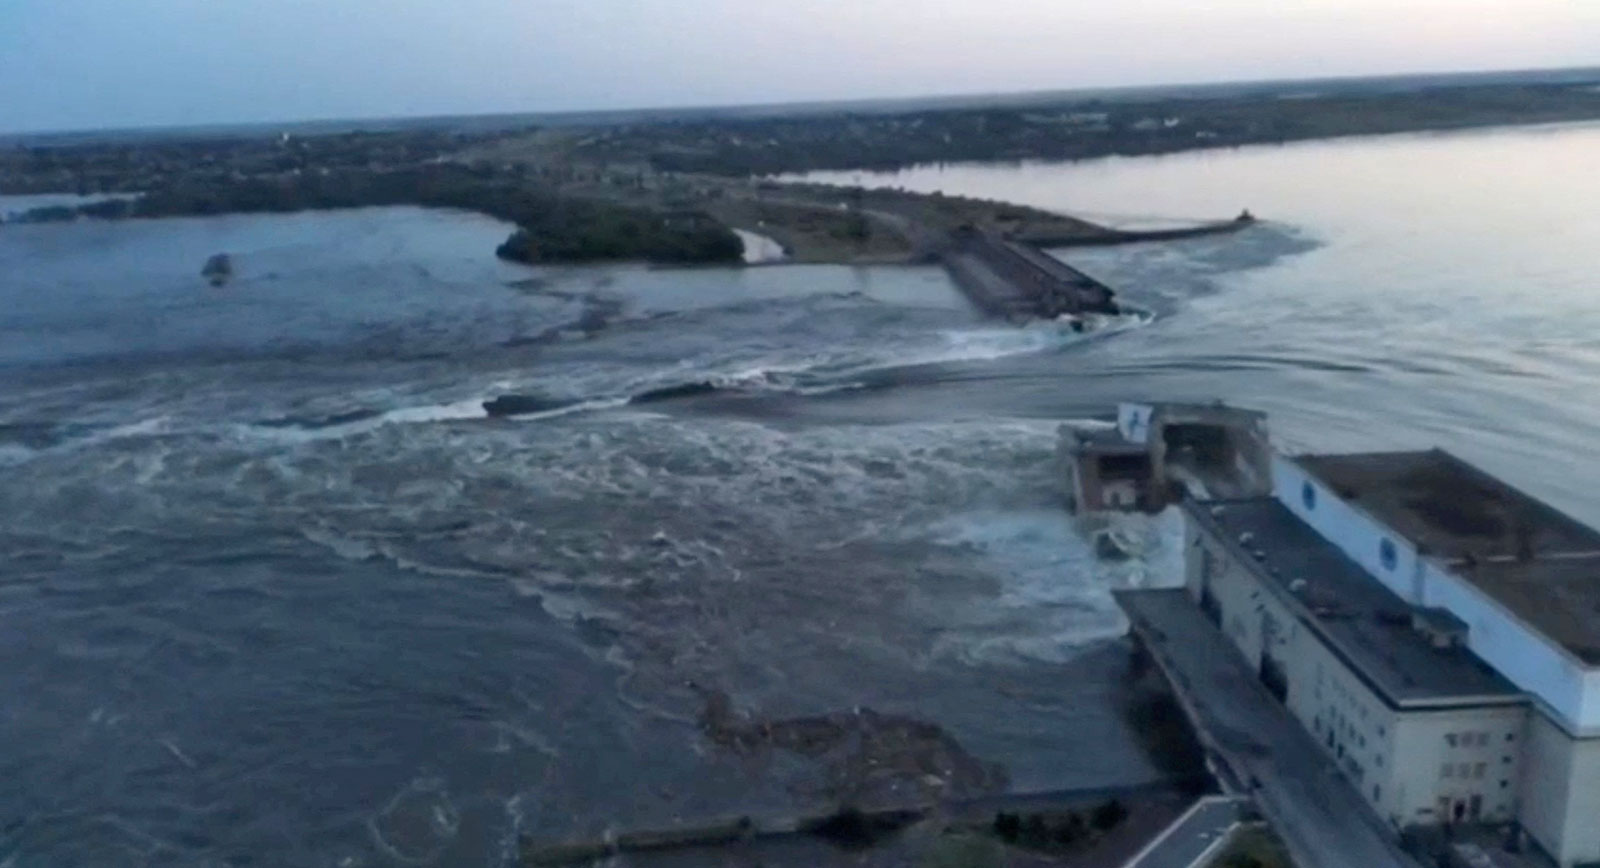 The breach in the Nova Kakhovka dam is seen in a screen grab taken from a video obtained by Reuters.